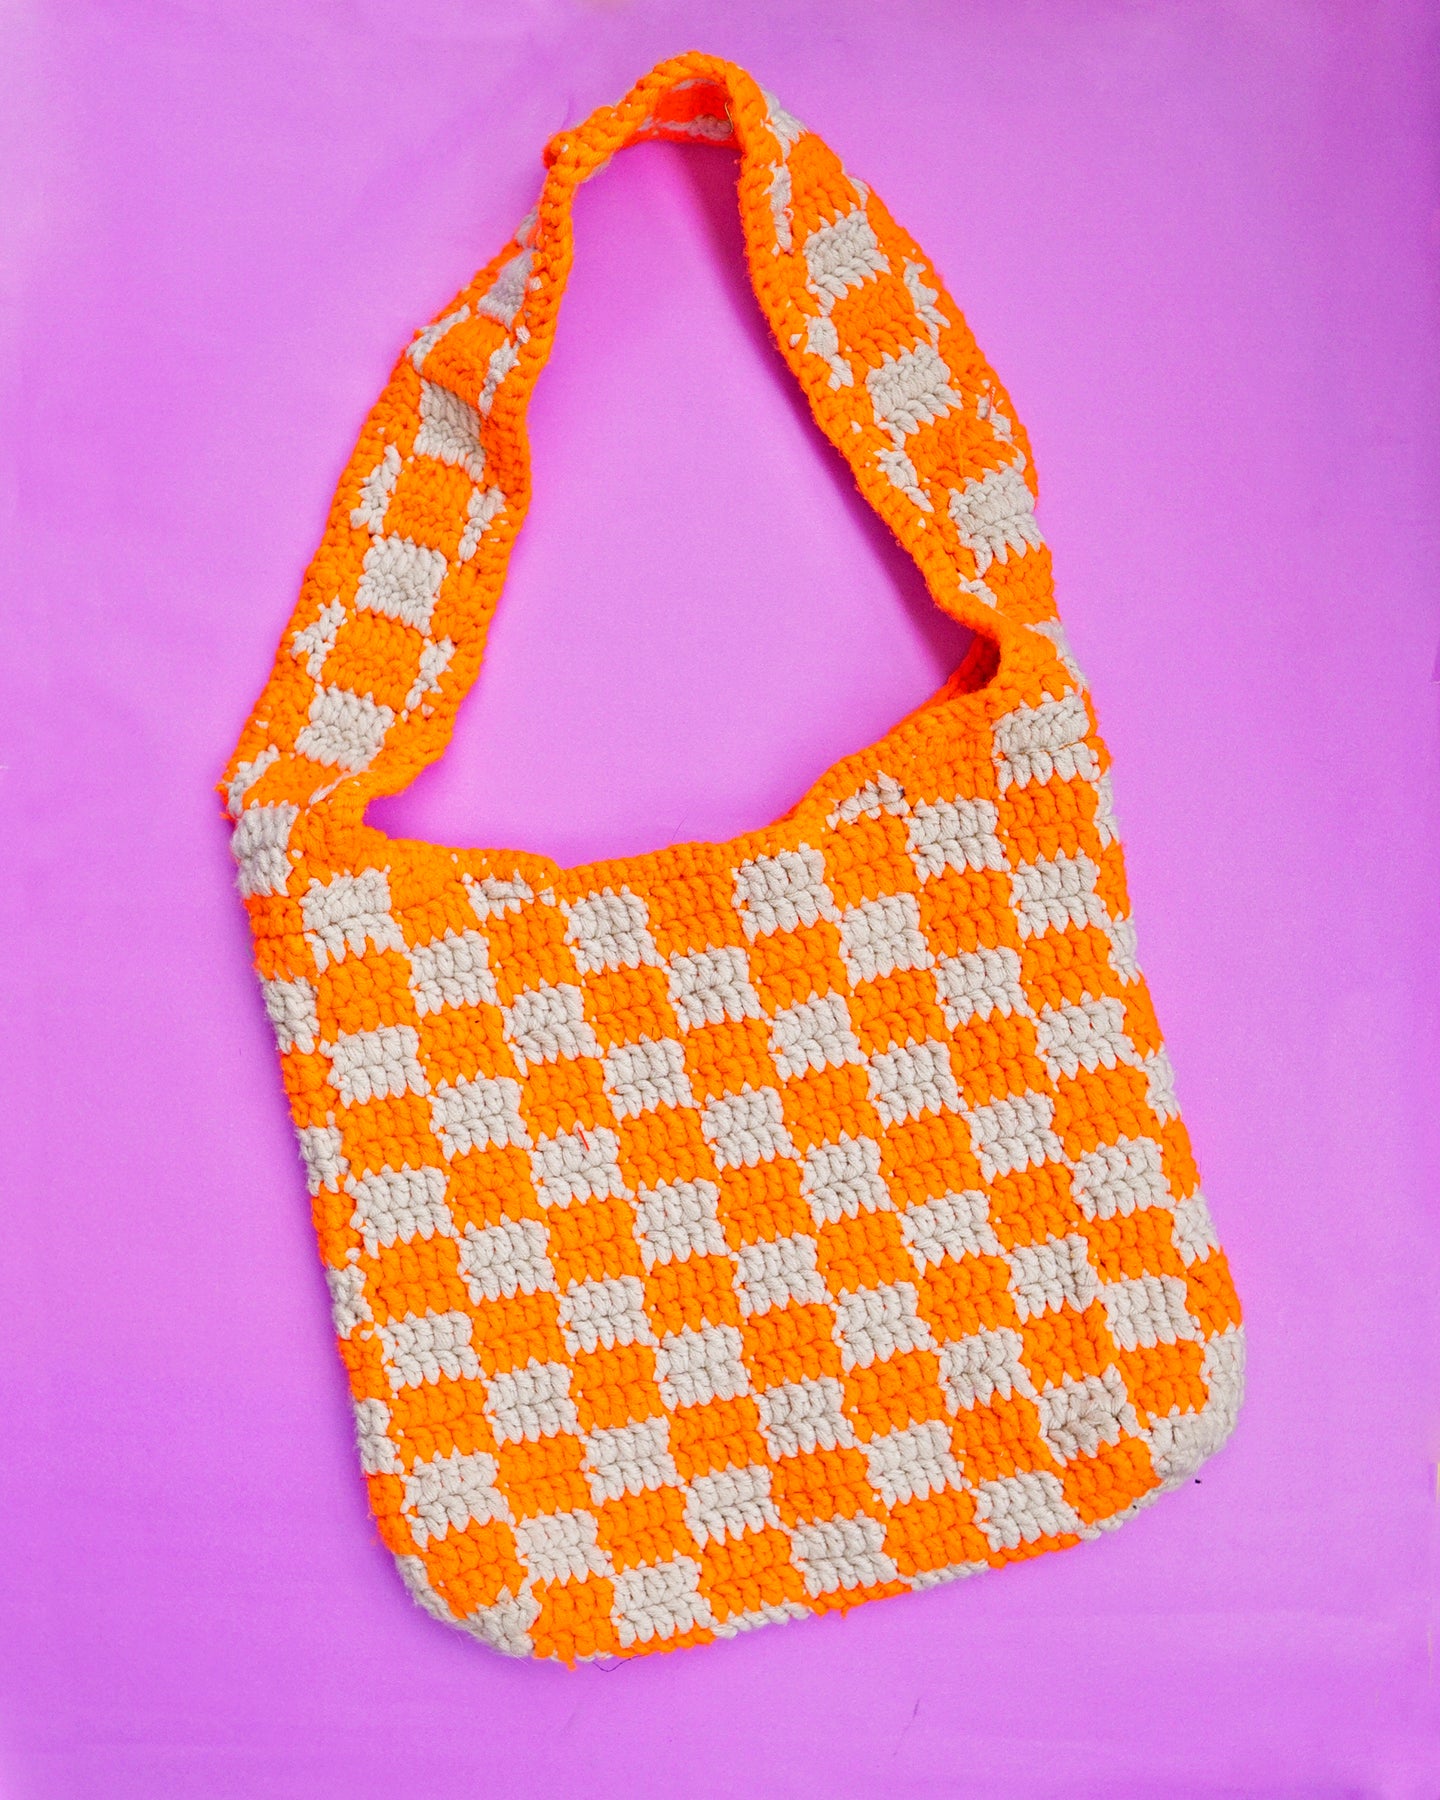 Checkered Market Tote in Kahel